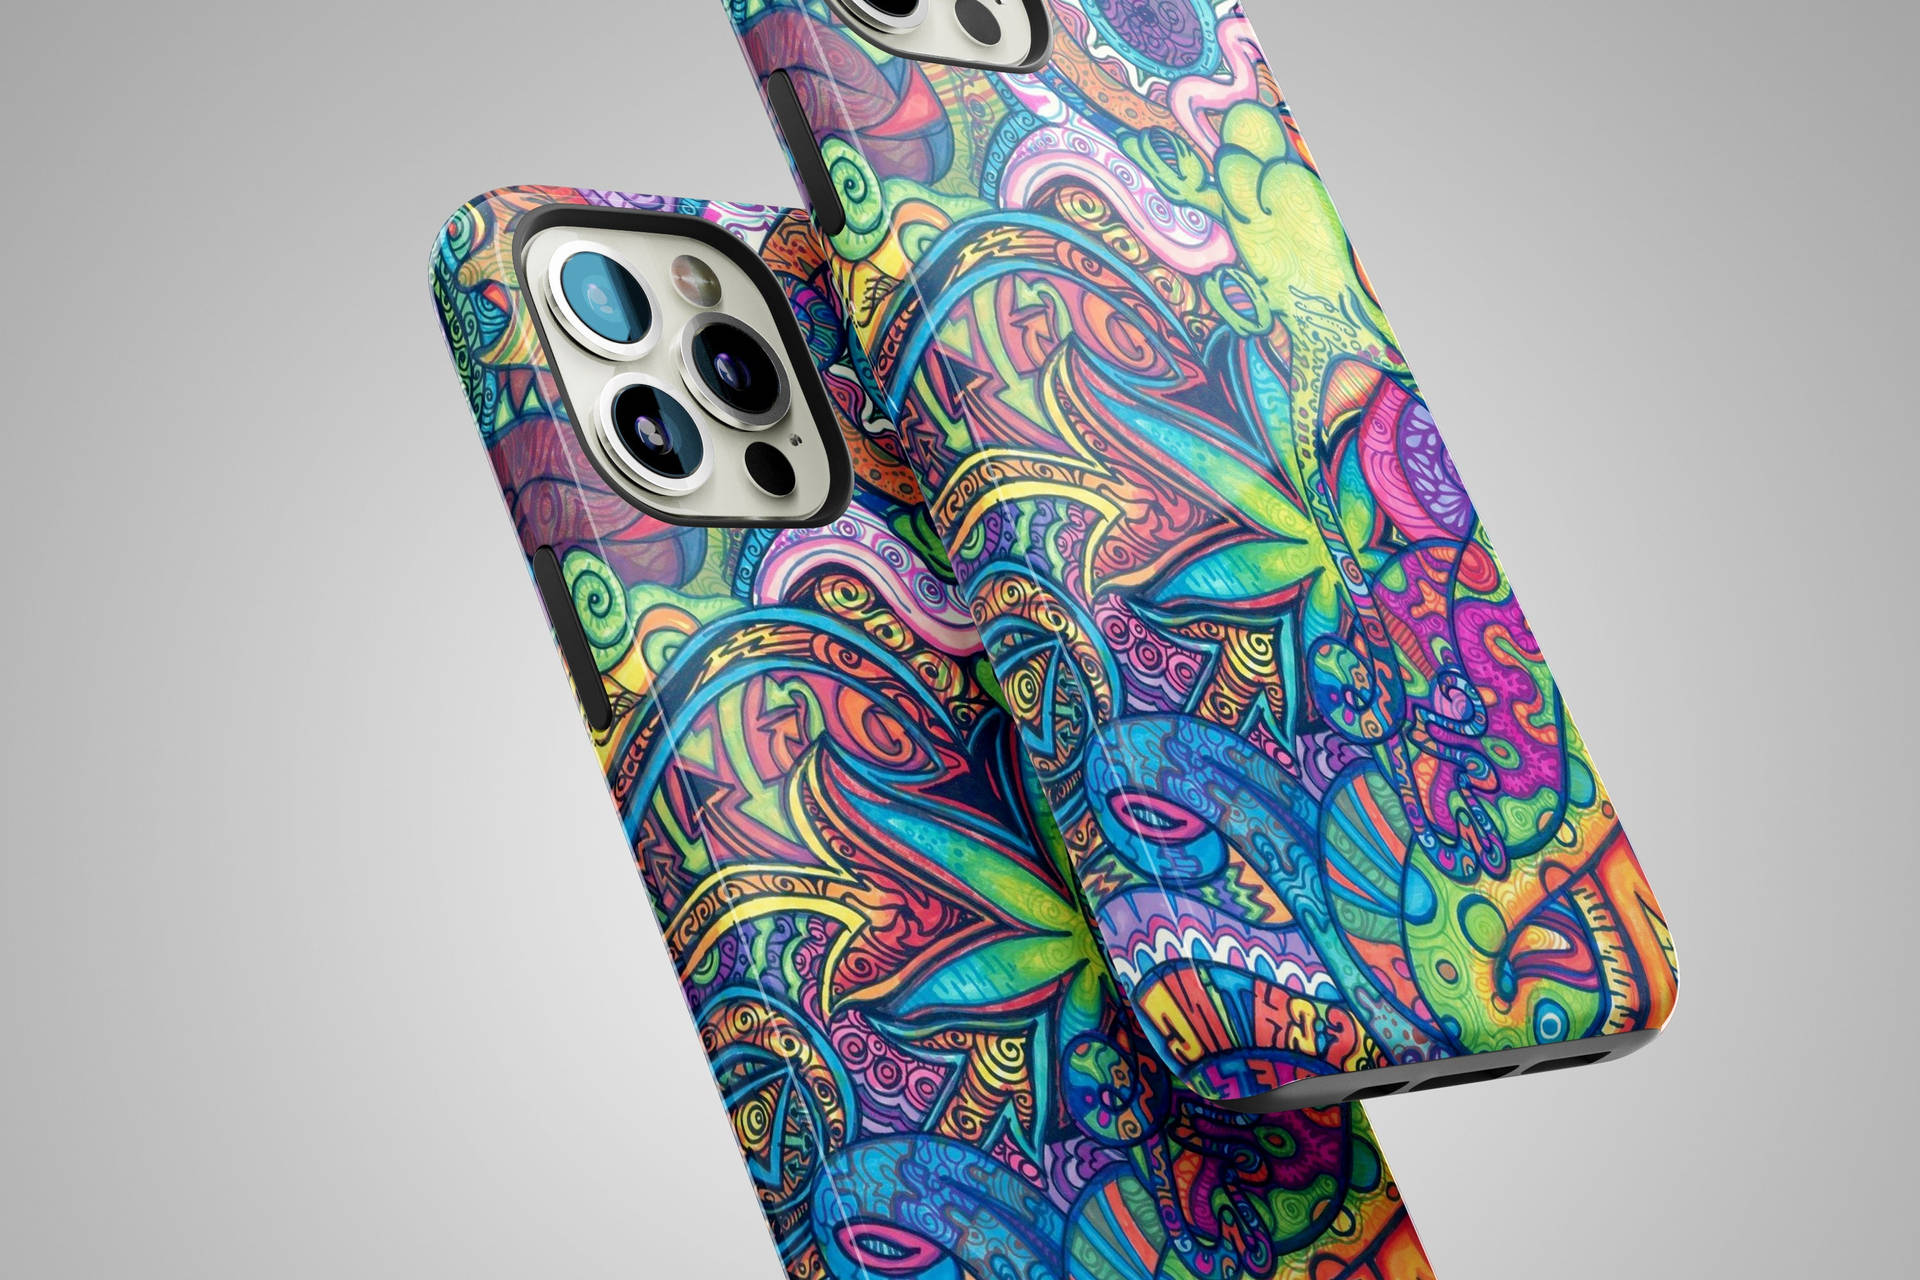 A Colorful Case With A Psychedelic Design Wallpaper